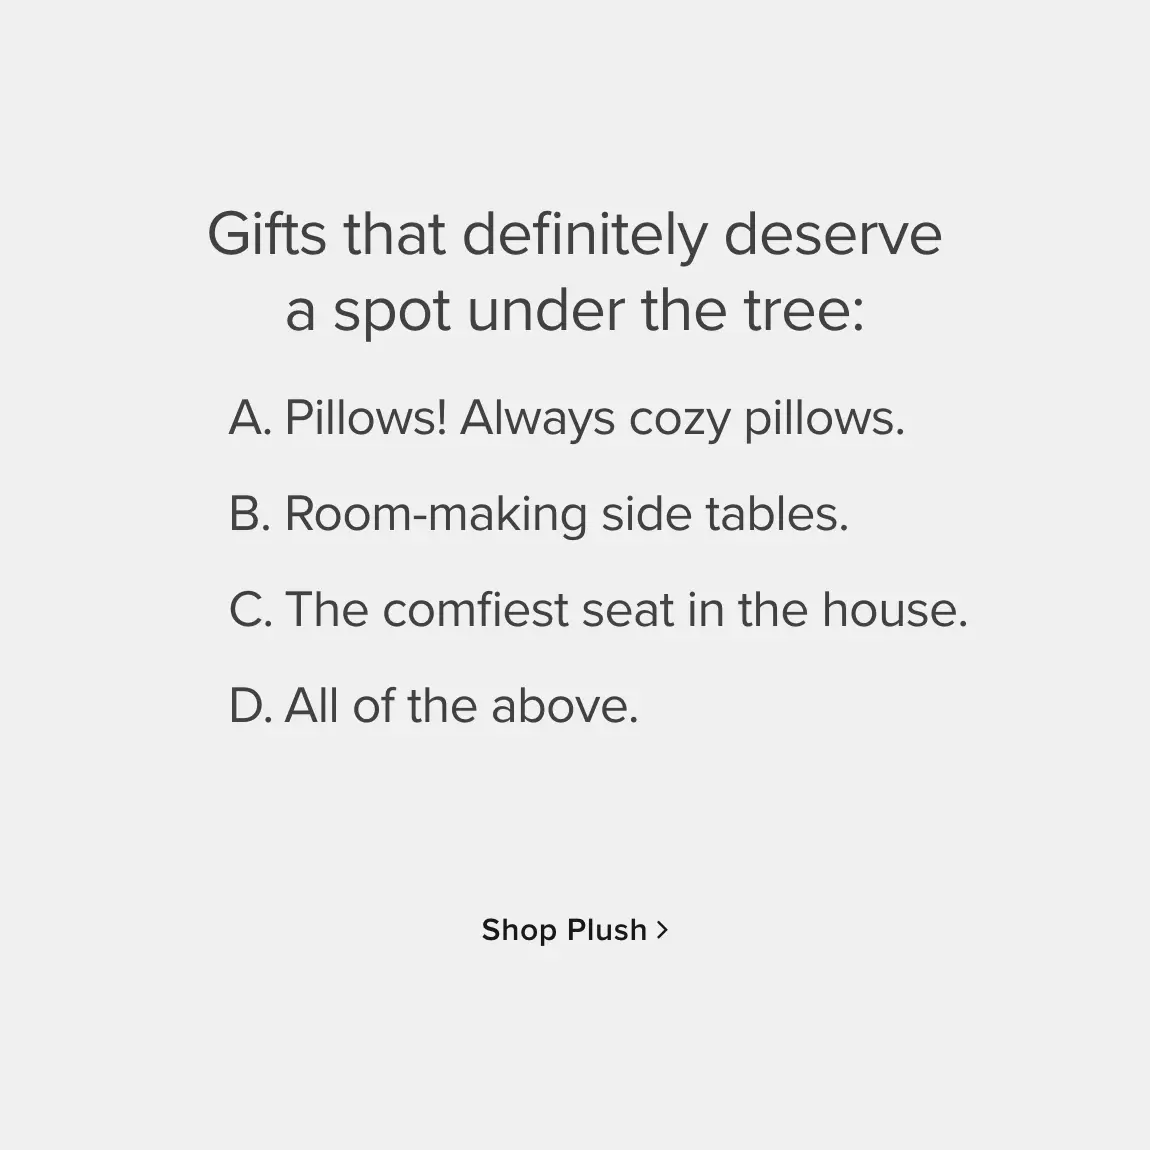 Gifts the definitely deserve a spot under the tree: A. Pillows! Always cozy pillows. B. Room-making side tables. C. The comfiest seat in the house. D. All of the above. - Shop Plush